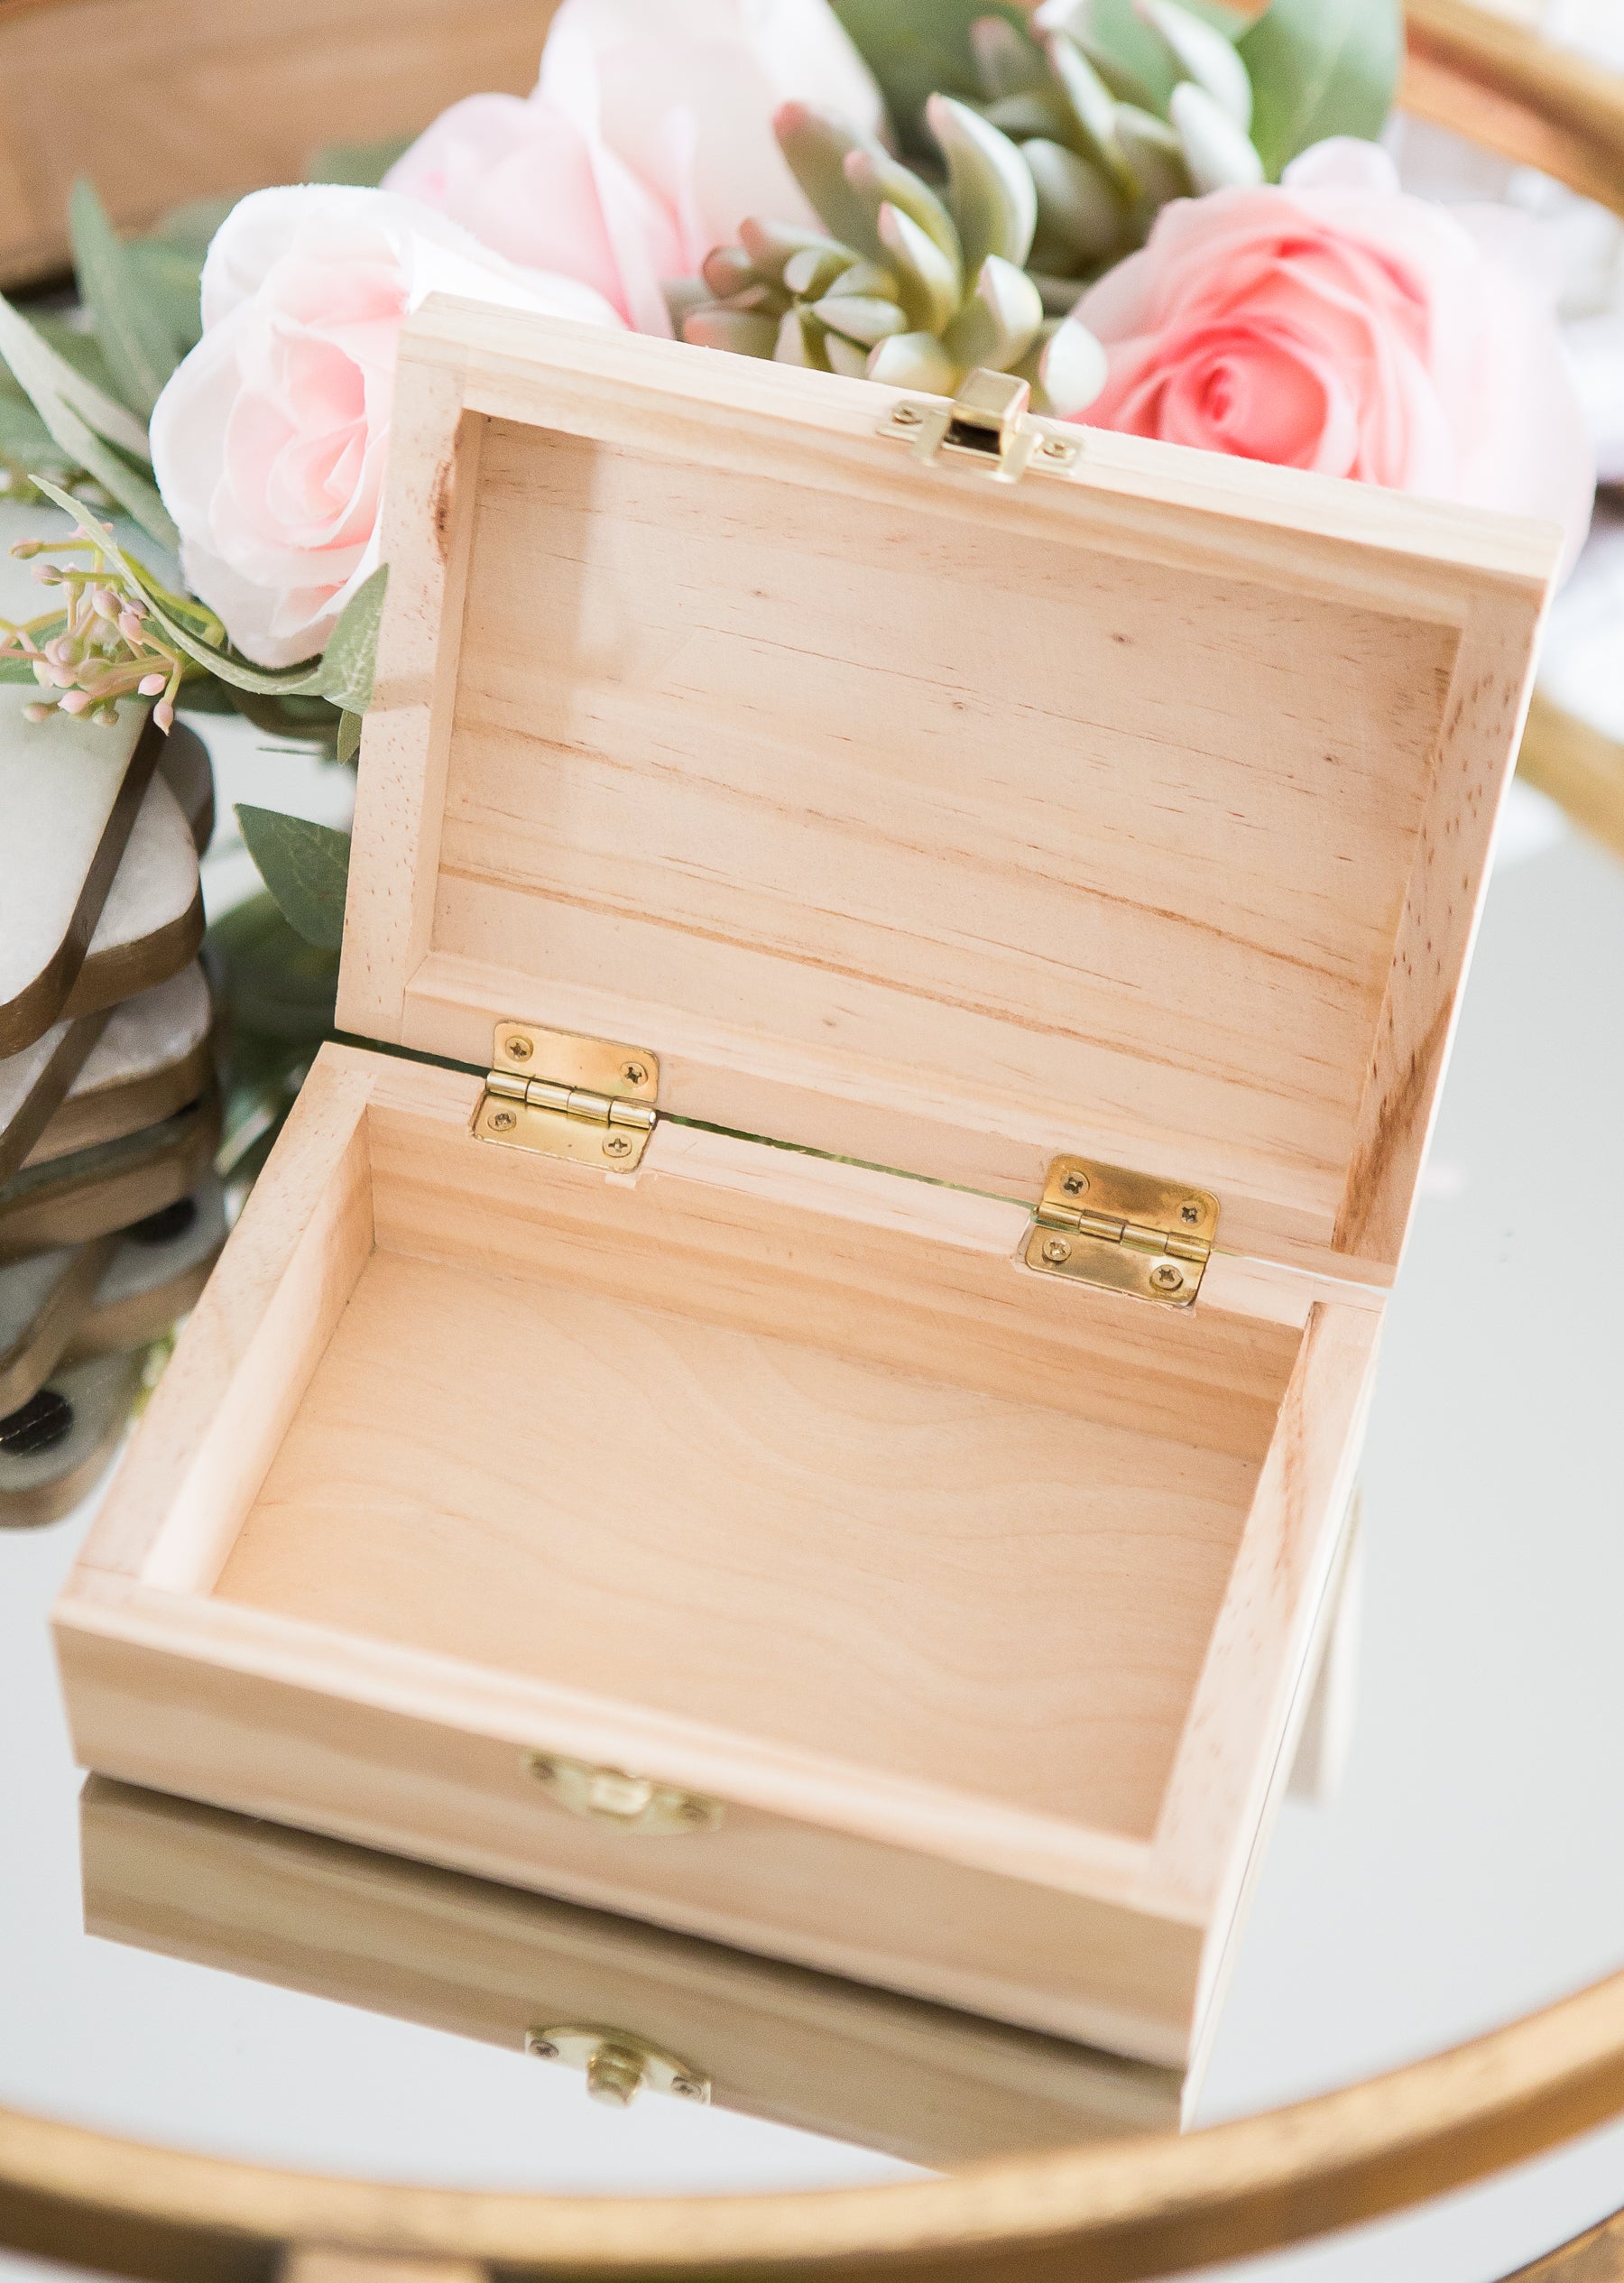 Custom Personalized Jewelry Box - Add your own Picture, Design